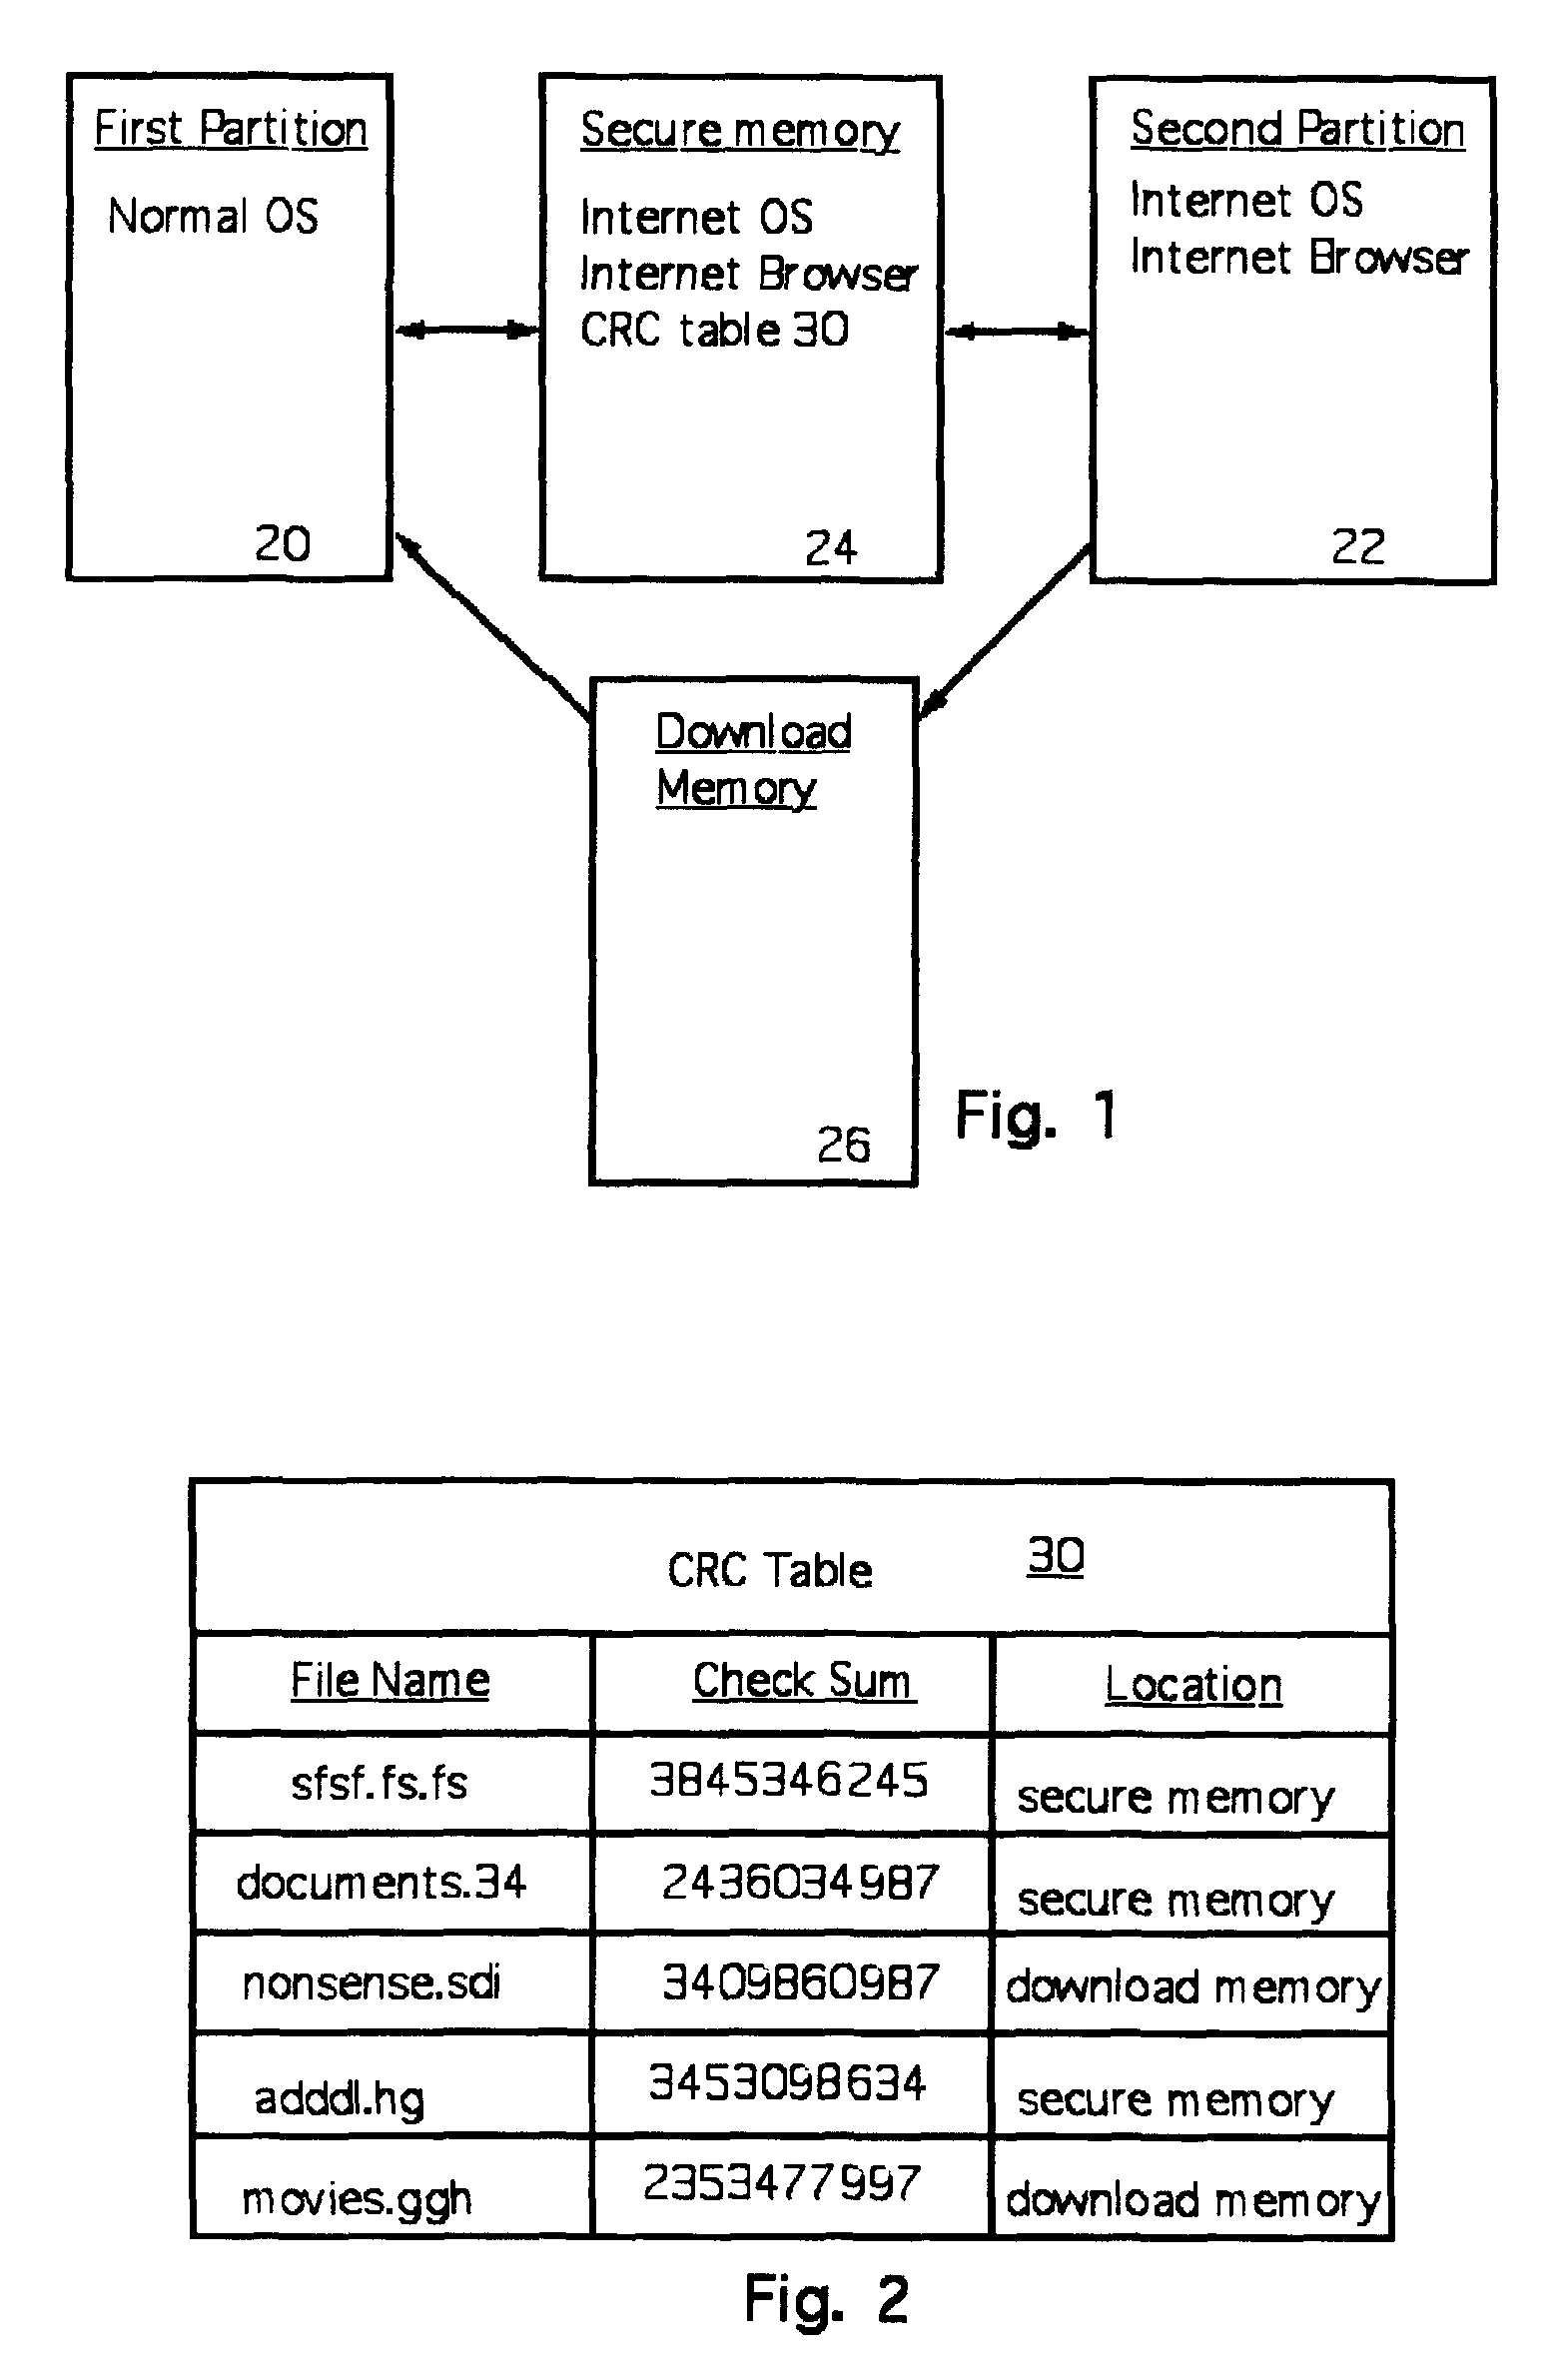 Method for preventing malicious software installation on an internet-connected computer